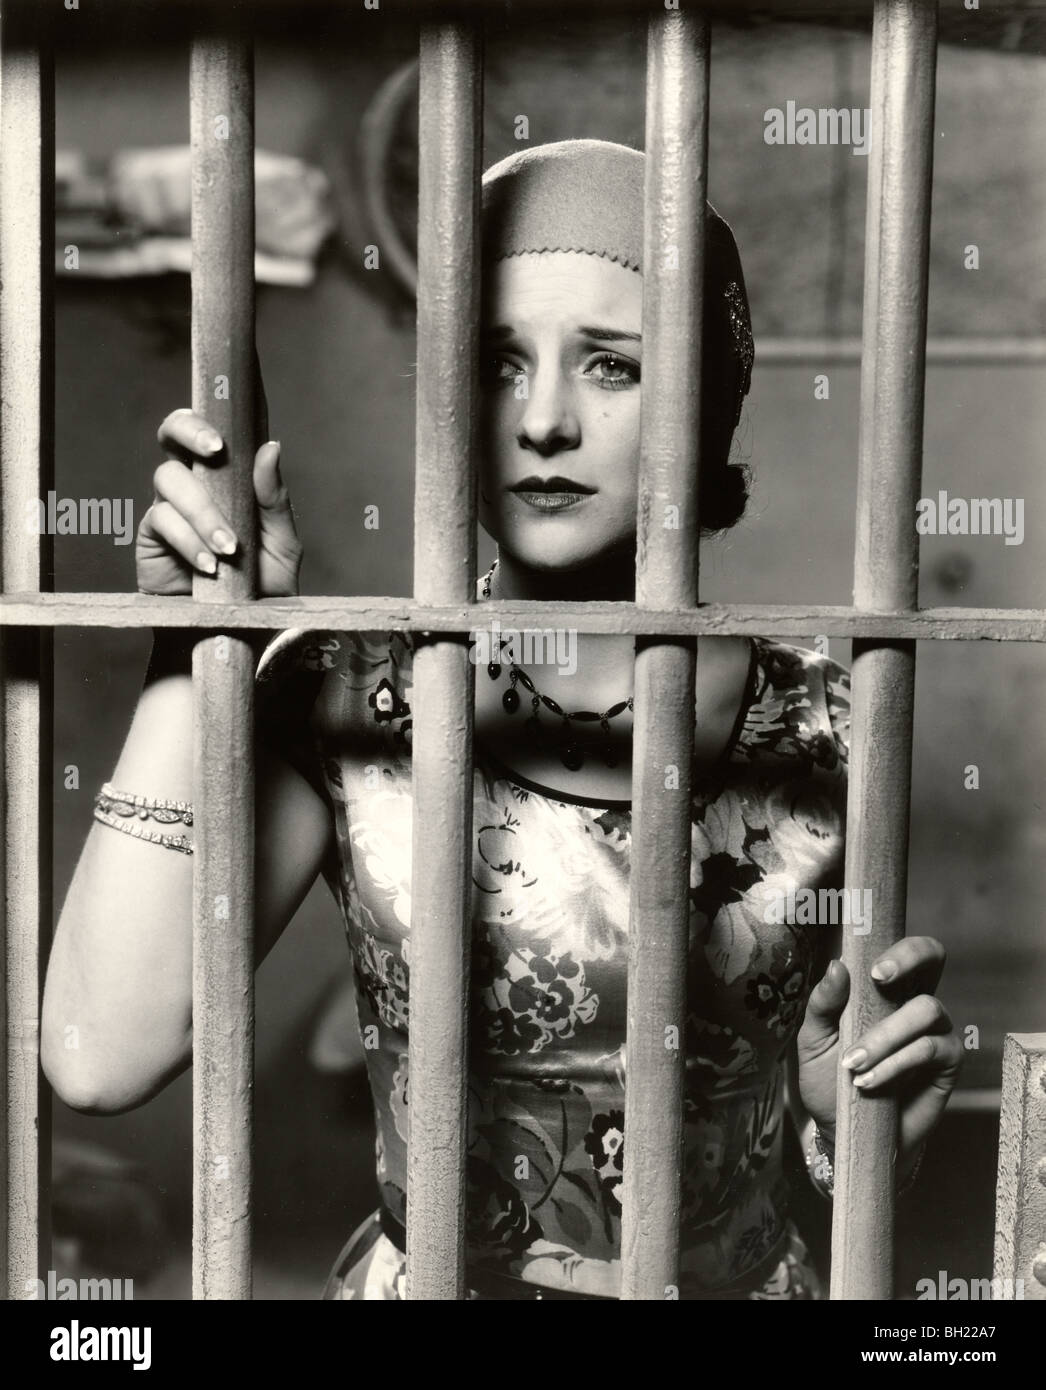 Beautiful Woman Behind Bars in Prison Stock Photo